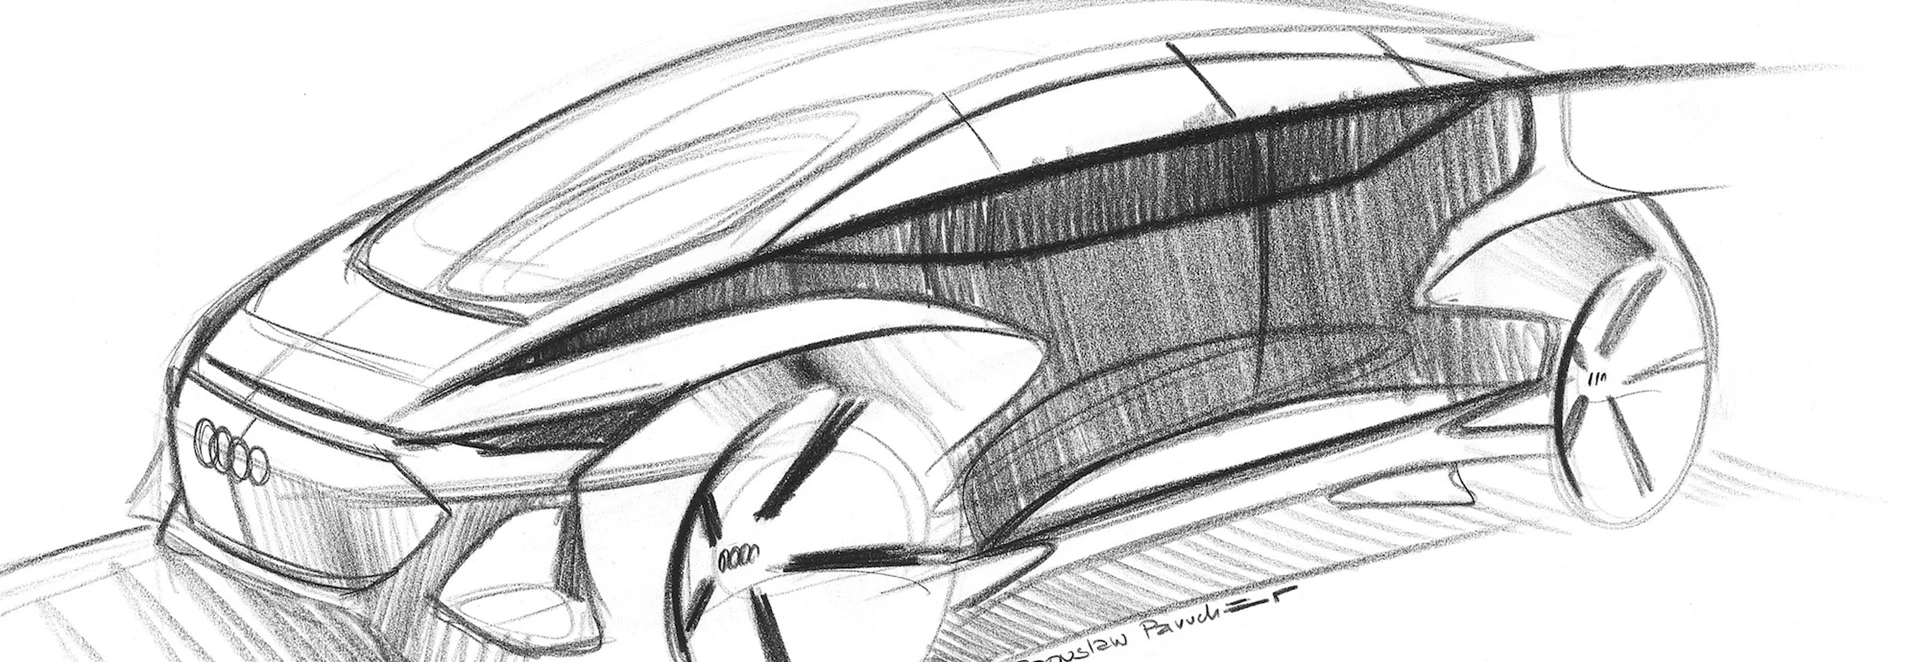 Audi previews upcoming AI:me concept in new sketch